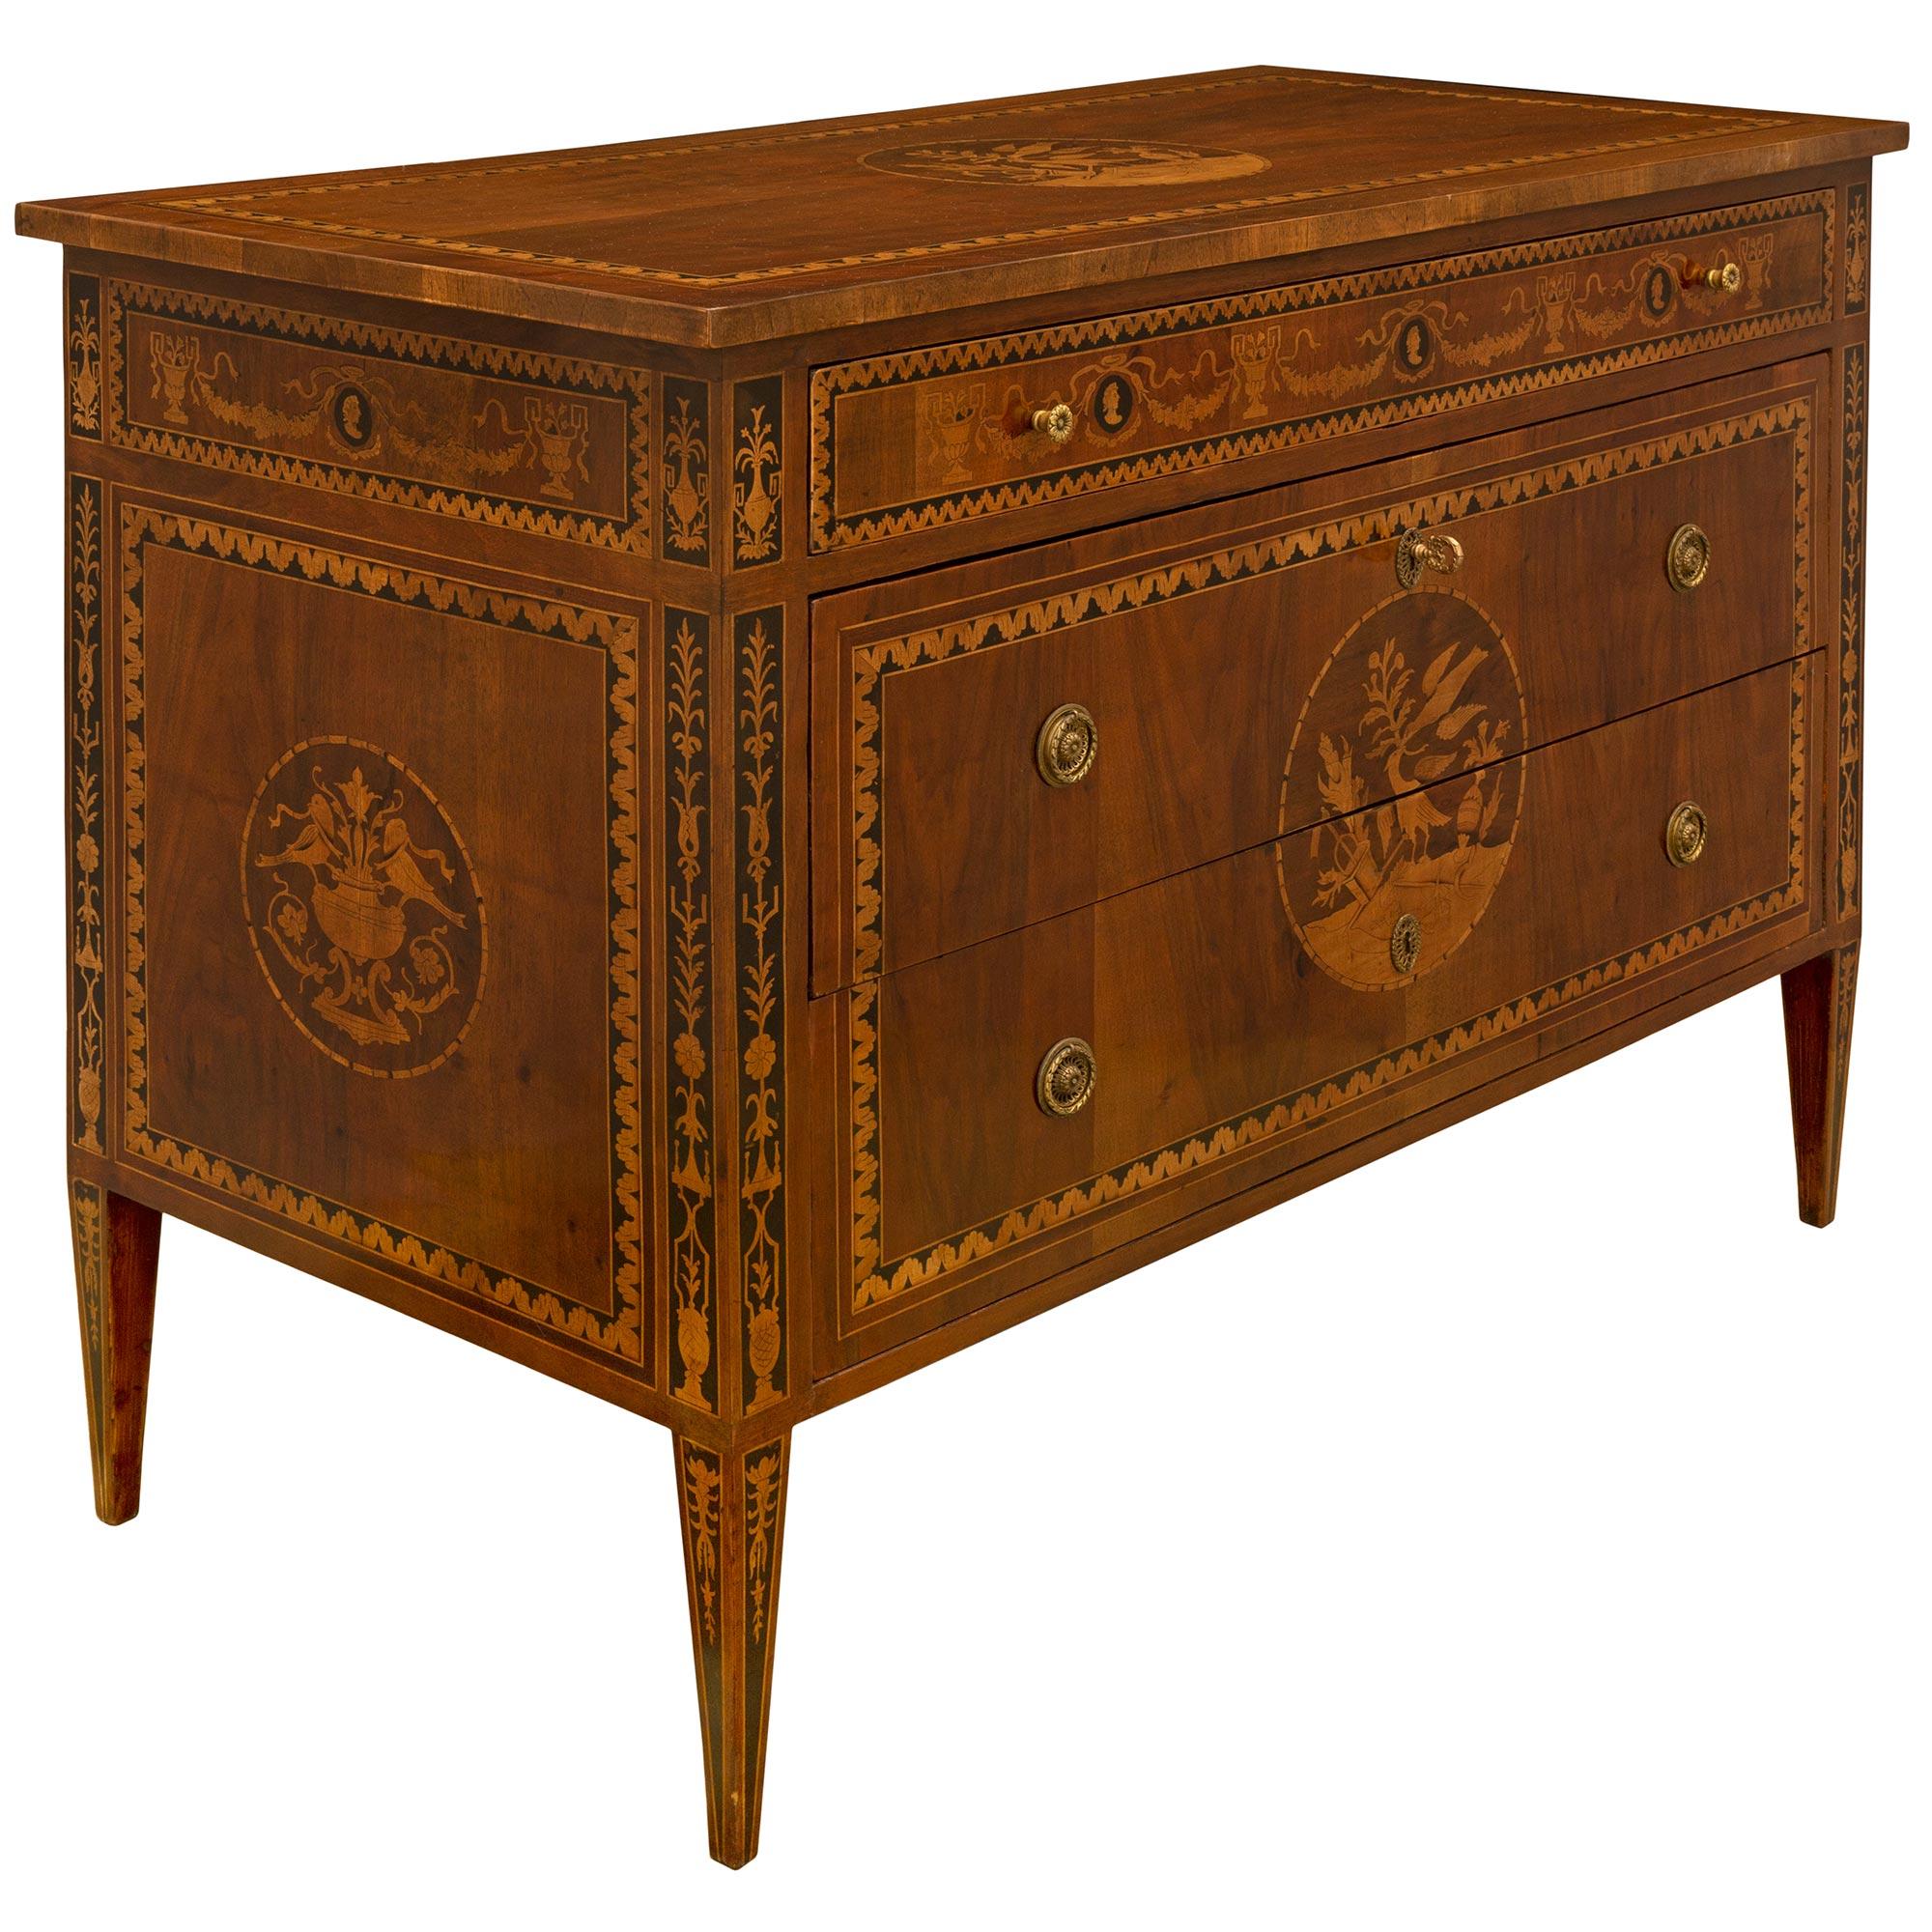 A very handsome Italian 18th century Louis XVI period walnut and tulipwood marquetry commode, in the manner of Maggiolini. The three drawer chest is raised on four square tapered legs with an intricate marquetry design that is repeated along with